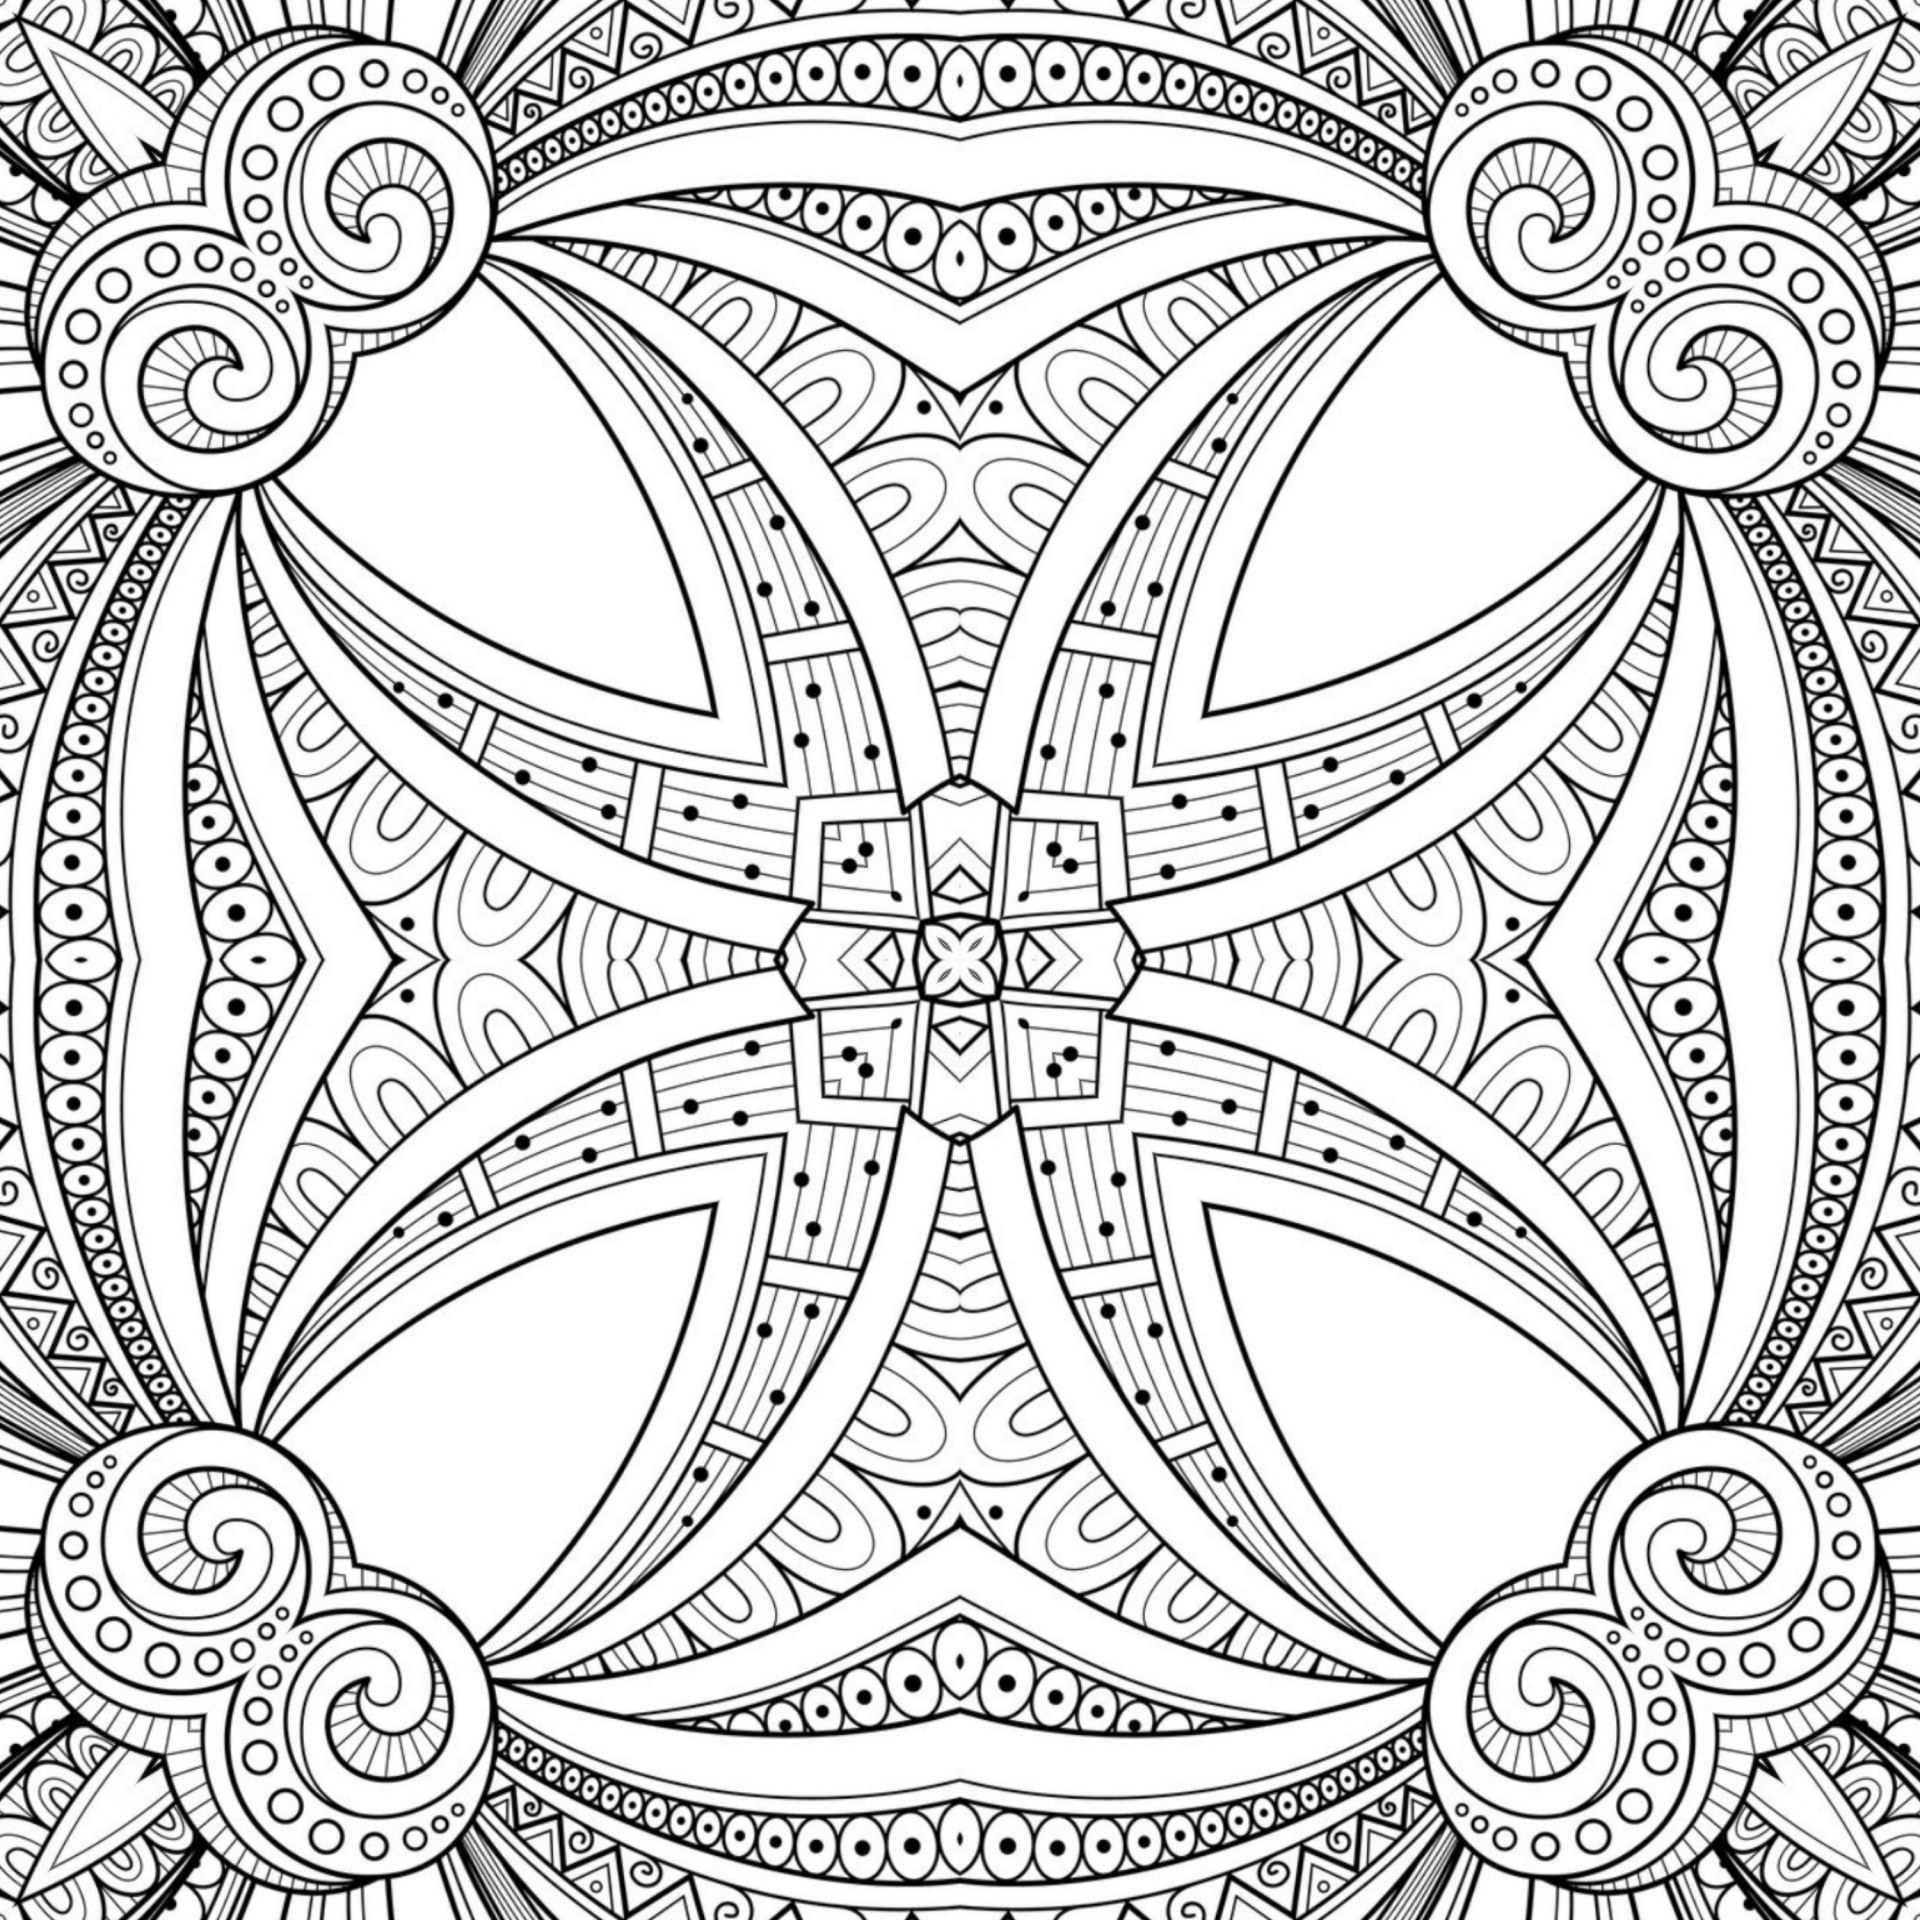 coloring-picture-2-free-stock-photo-public-domain-pictures